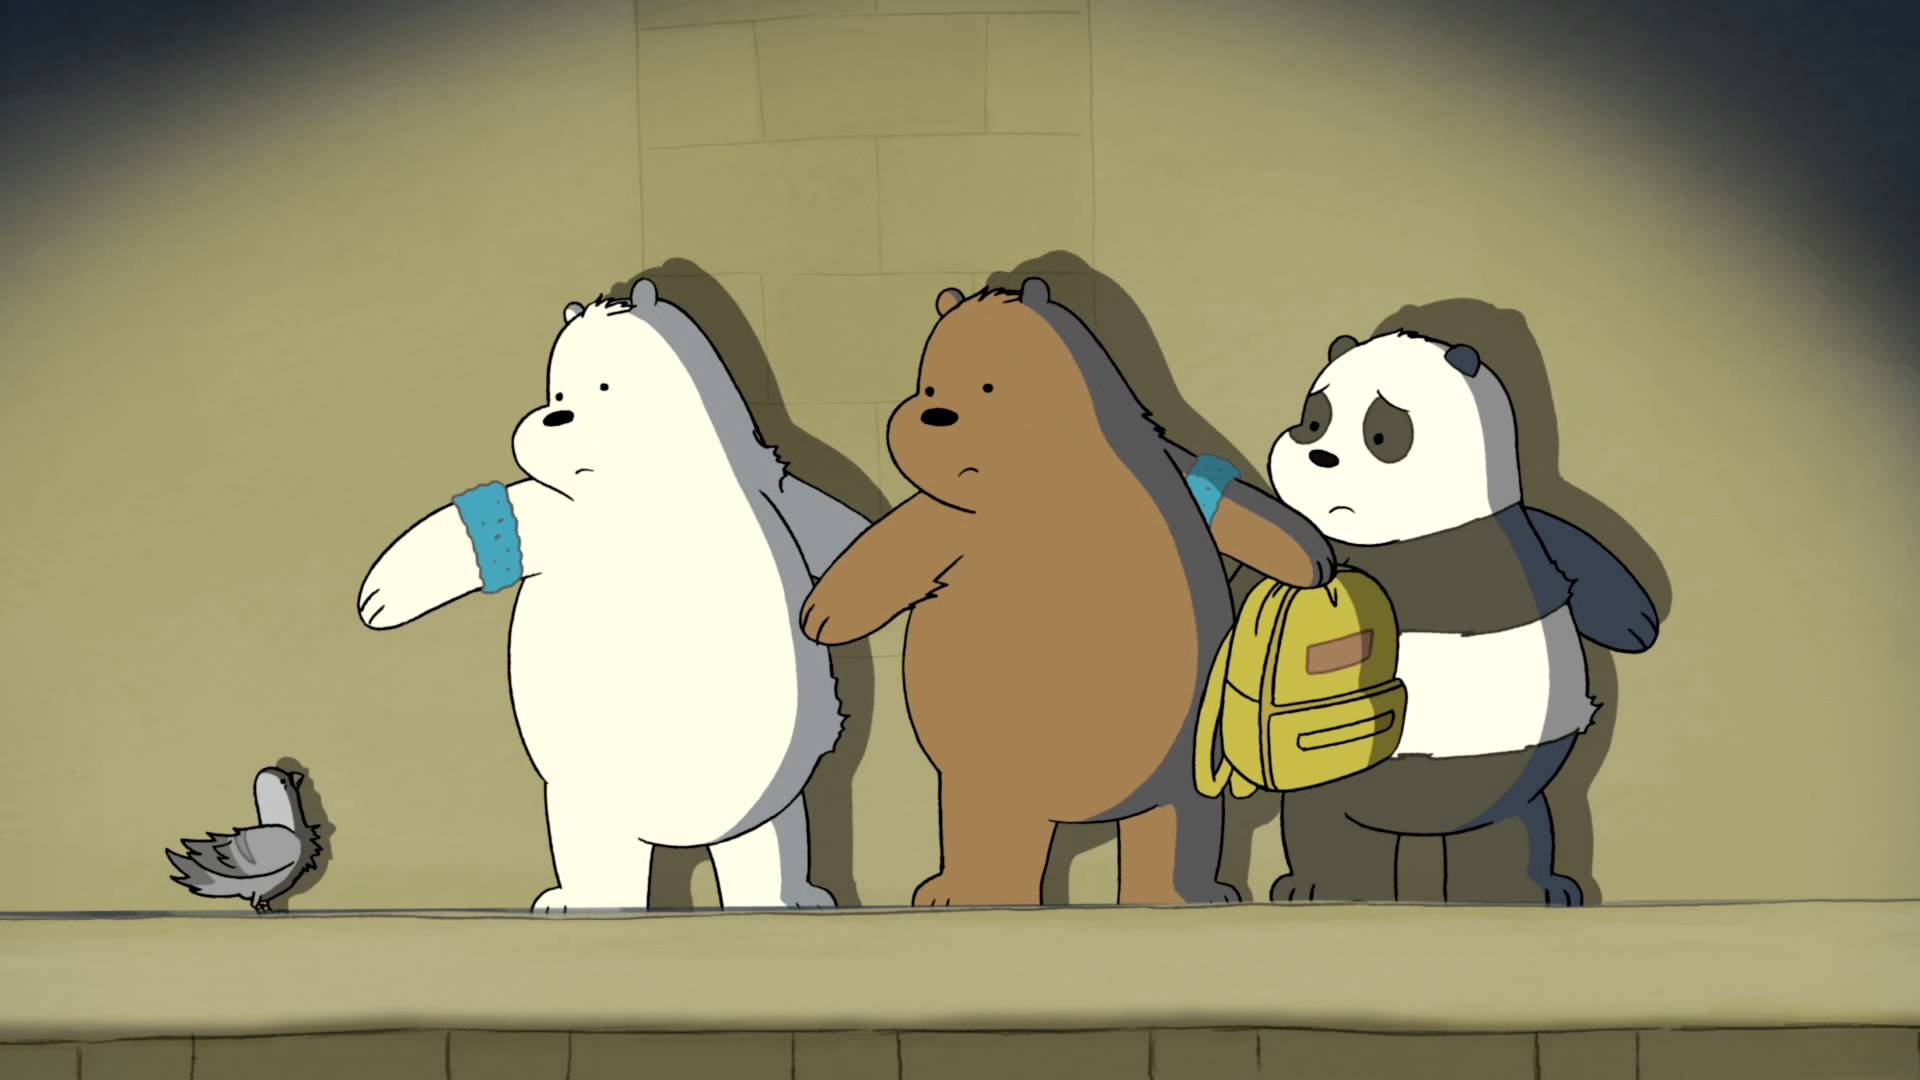 We Bare Bears Wallpapers - Wallpaper Cave